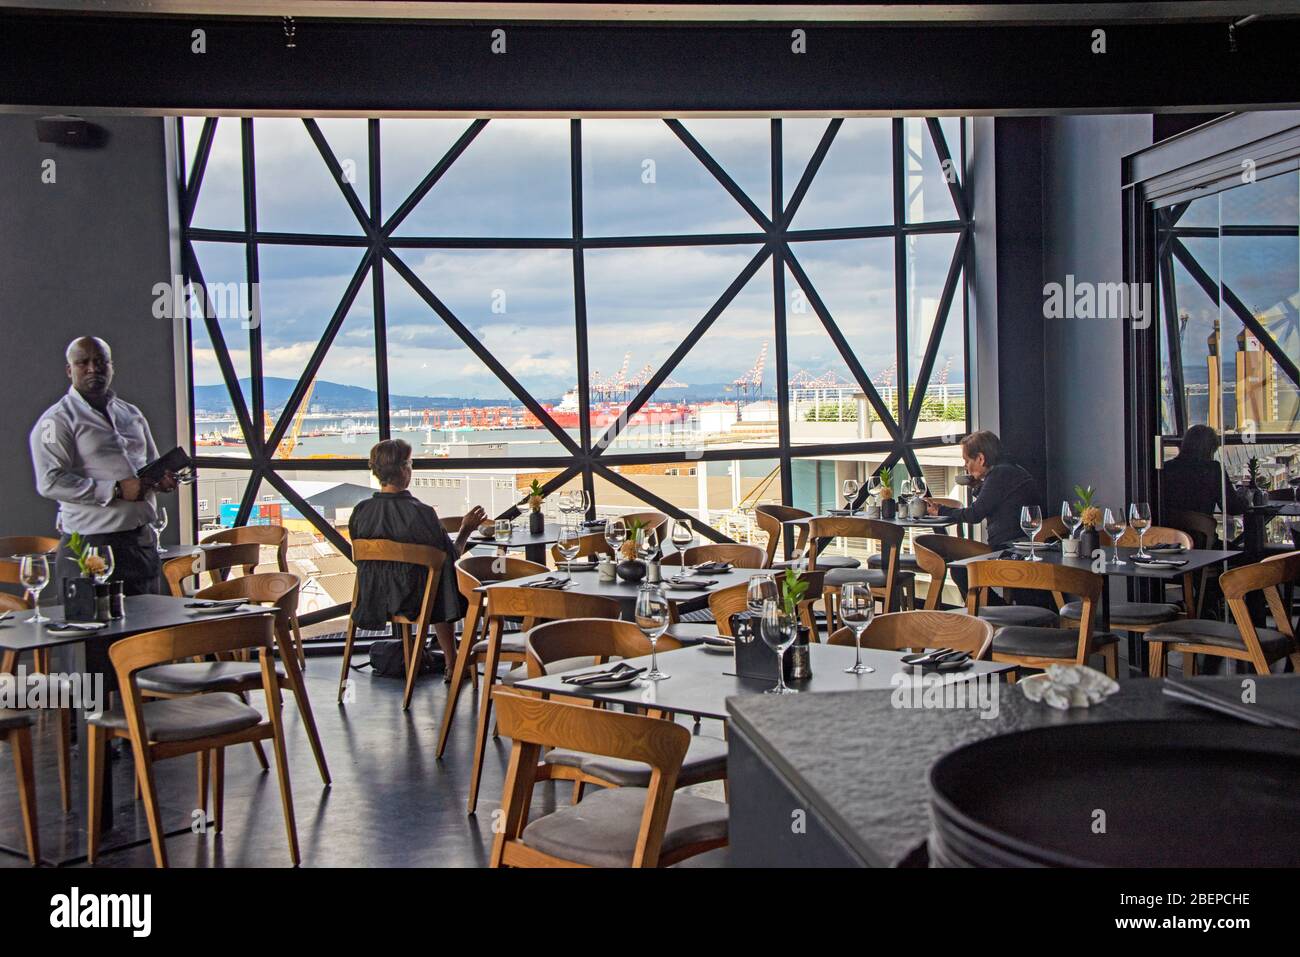 The restaurant on Level Six has stunning views and food. The Zeitz Museum of Contemporary Art Africa is a contemporary art museum located at the V&A Waterfront in Cape Town, South Africa. It is the largest museum of contemporary African art in the world. Stock Photo